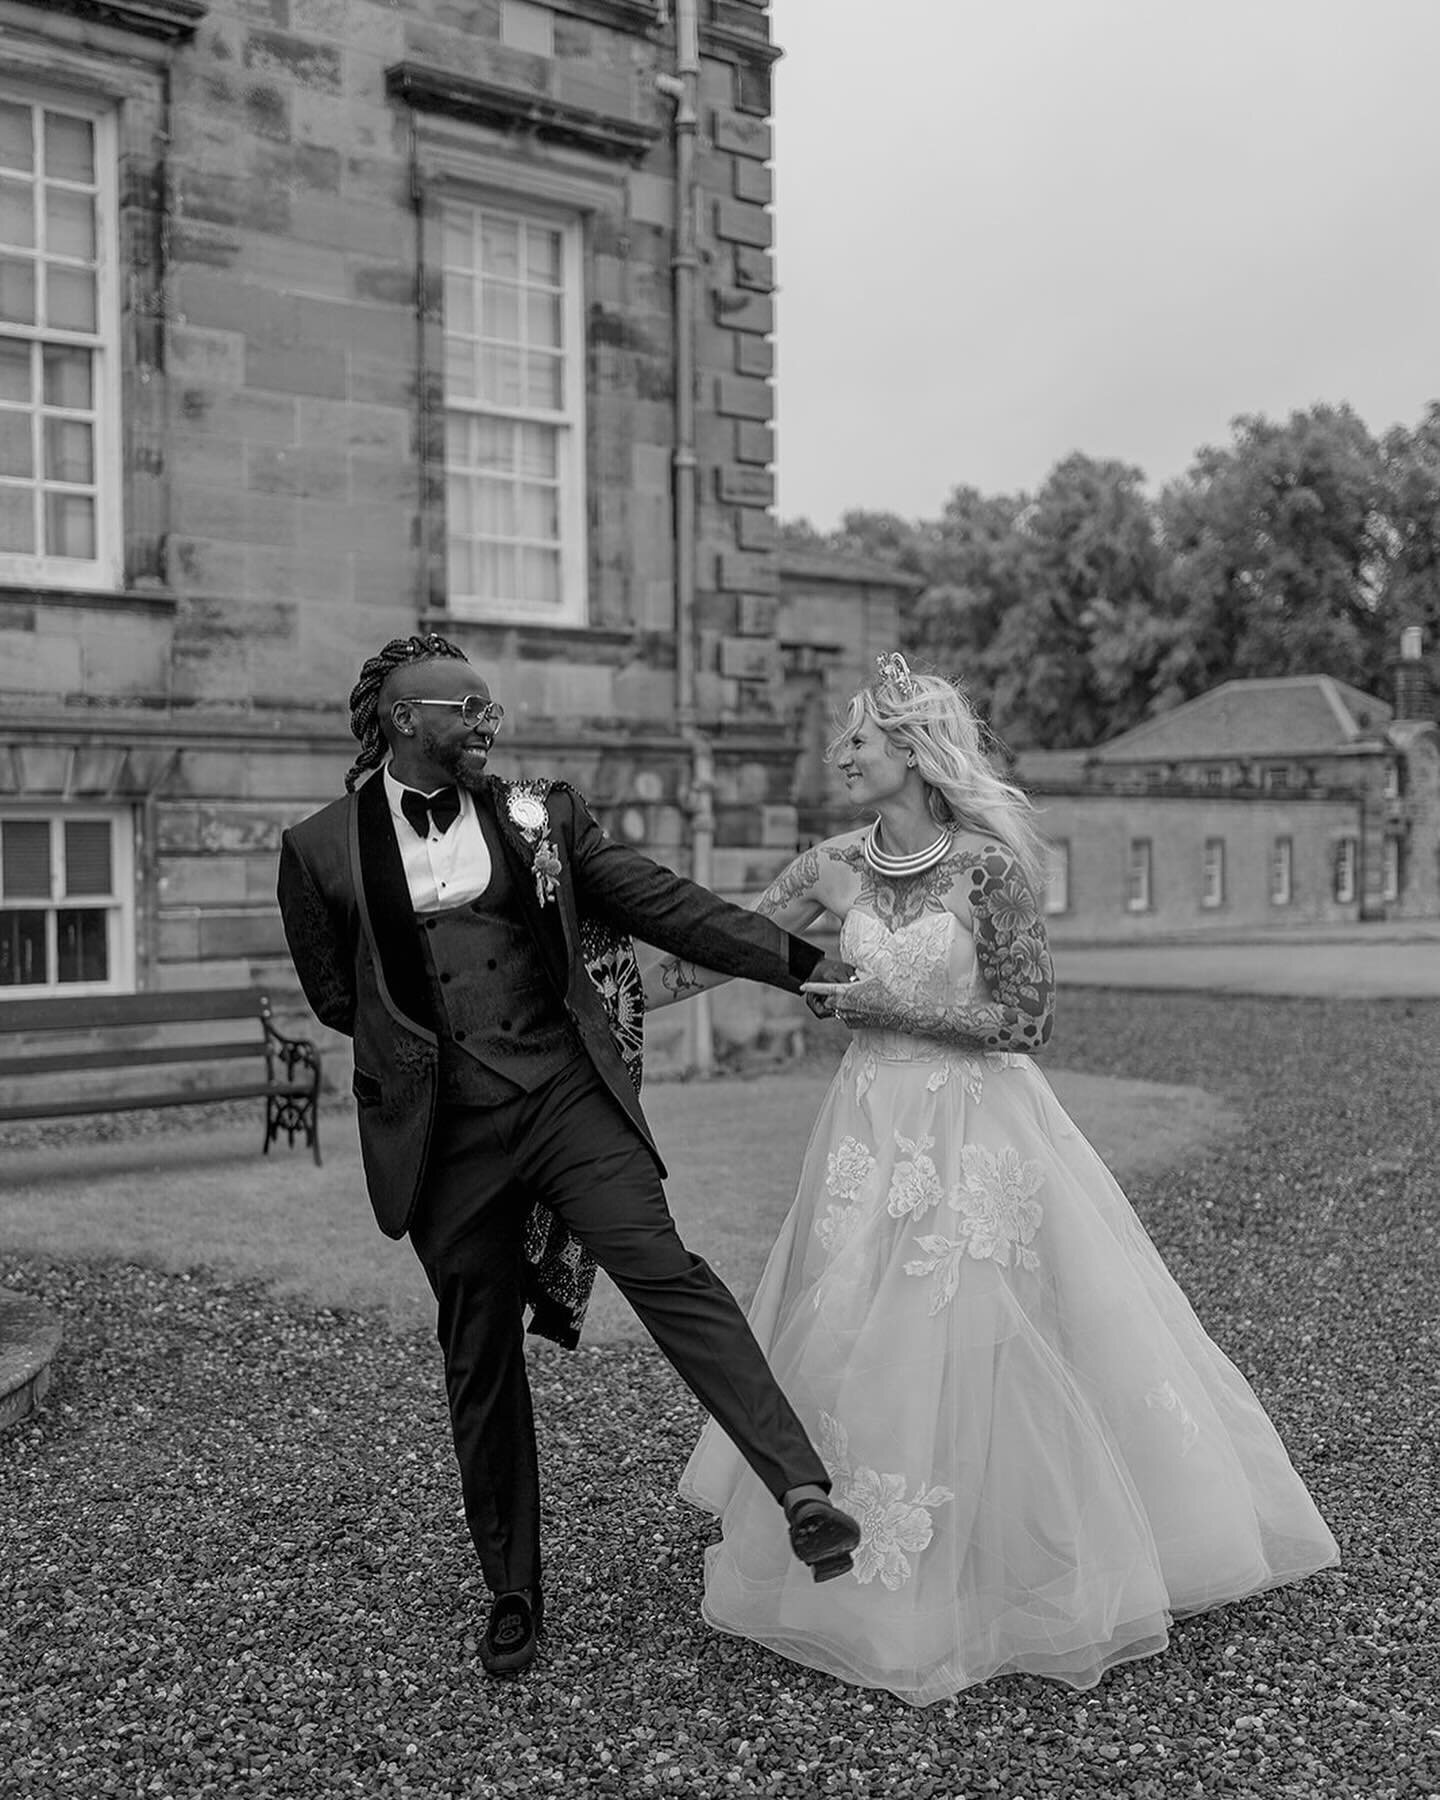 #FINDYOURWILD // K + O ♡⚡️
Straight out of a fairytale in a castle in Edinburgh, Scotland these two lovely humans celebrated their love amongst family and friends! @kateburge our beautiful stunning #realwildbride looking breathtaking in our #nudecolo